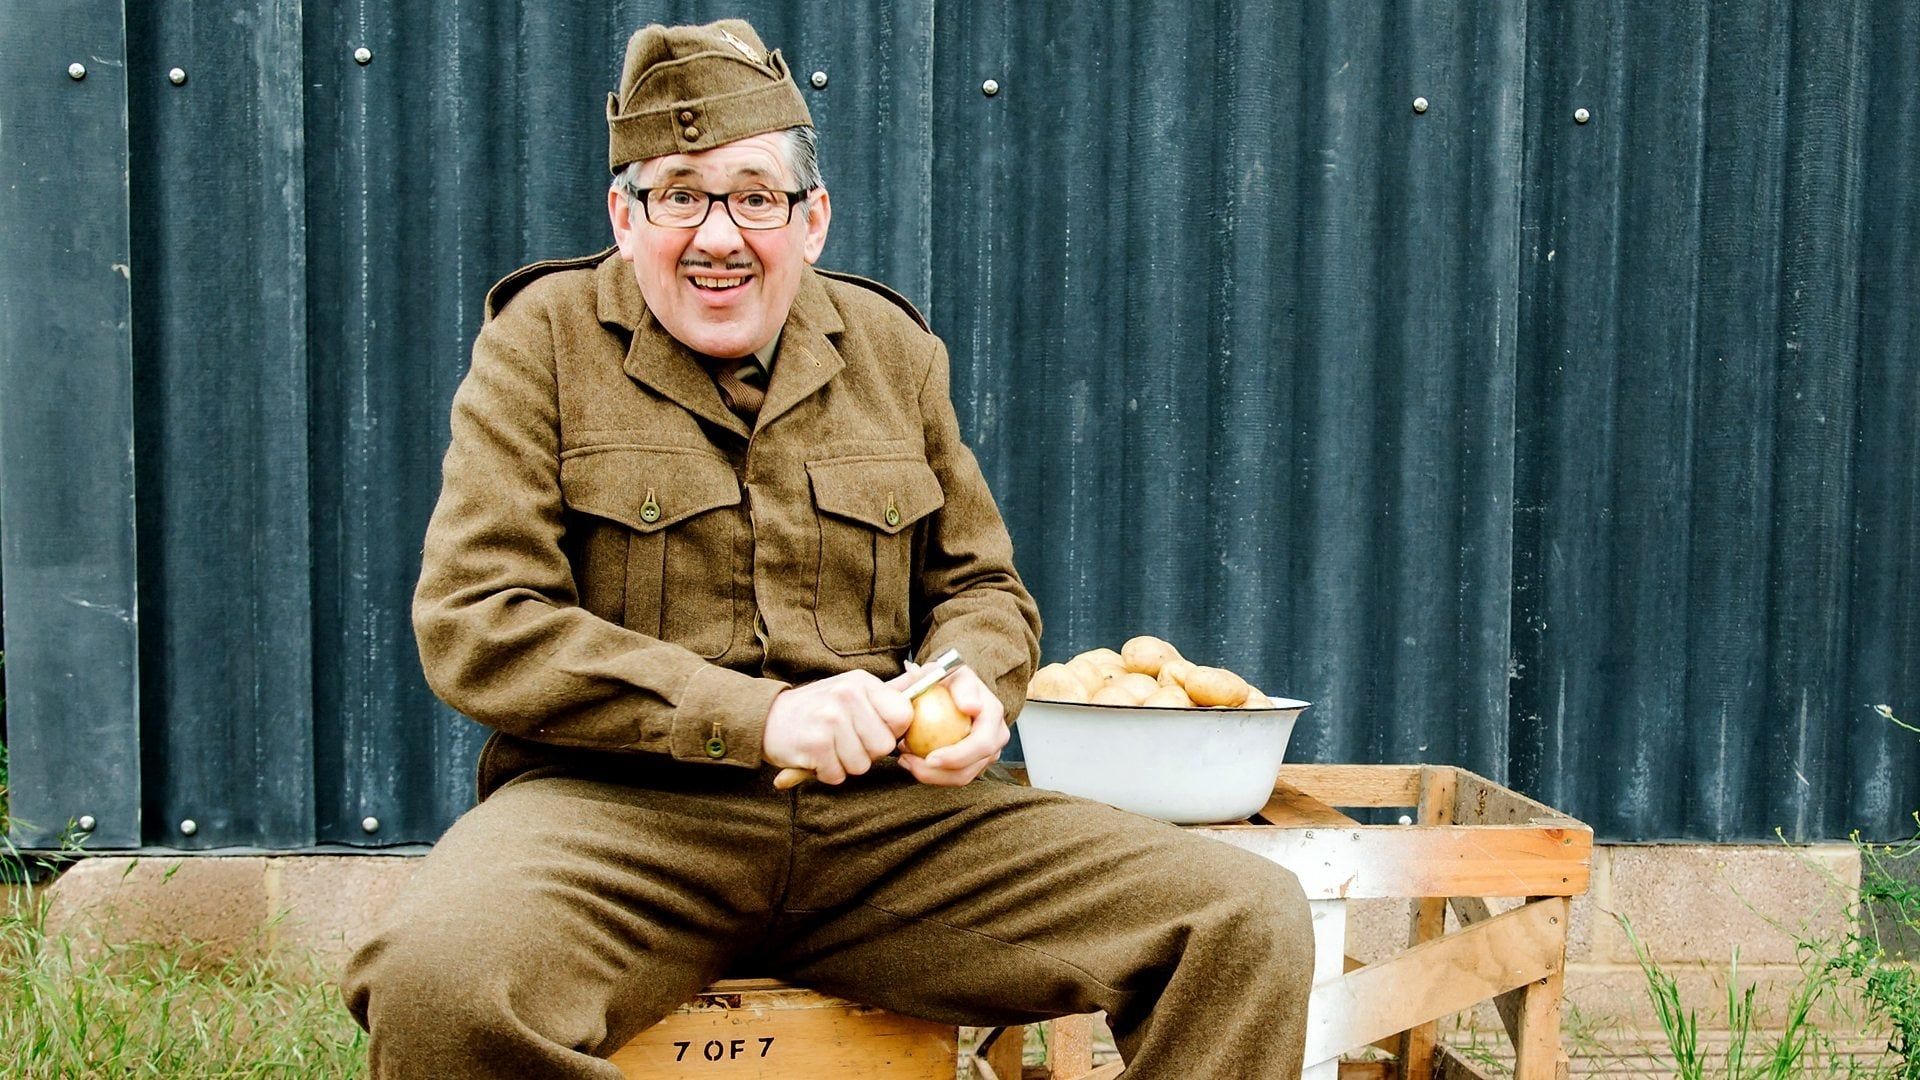 Count Arthur Strong background